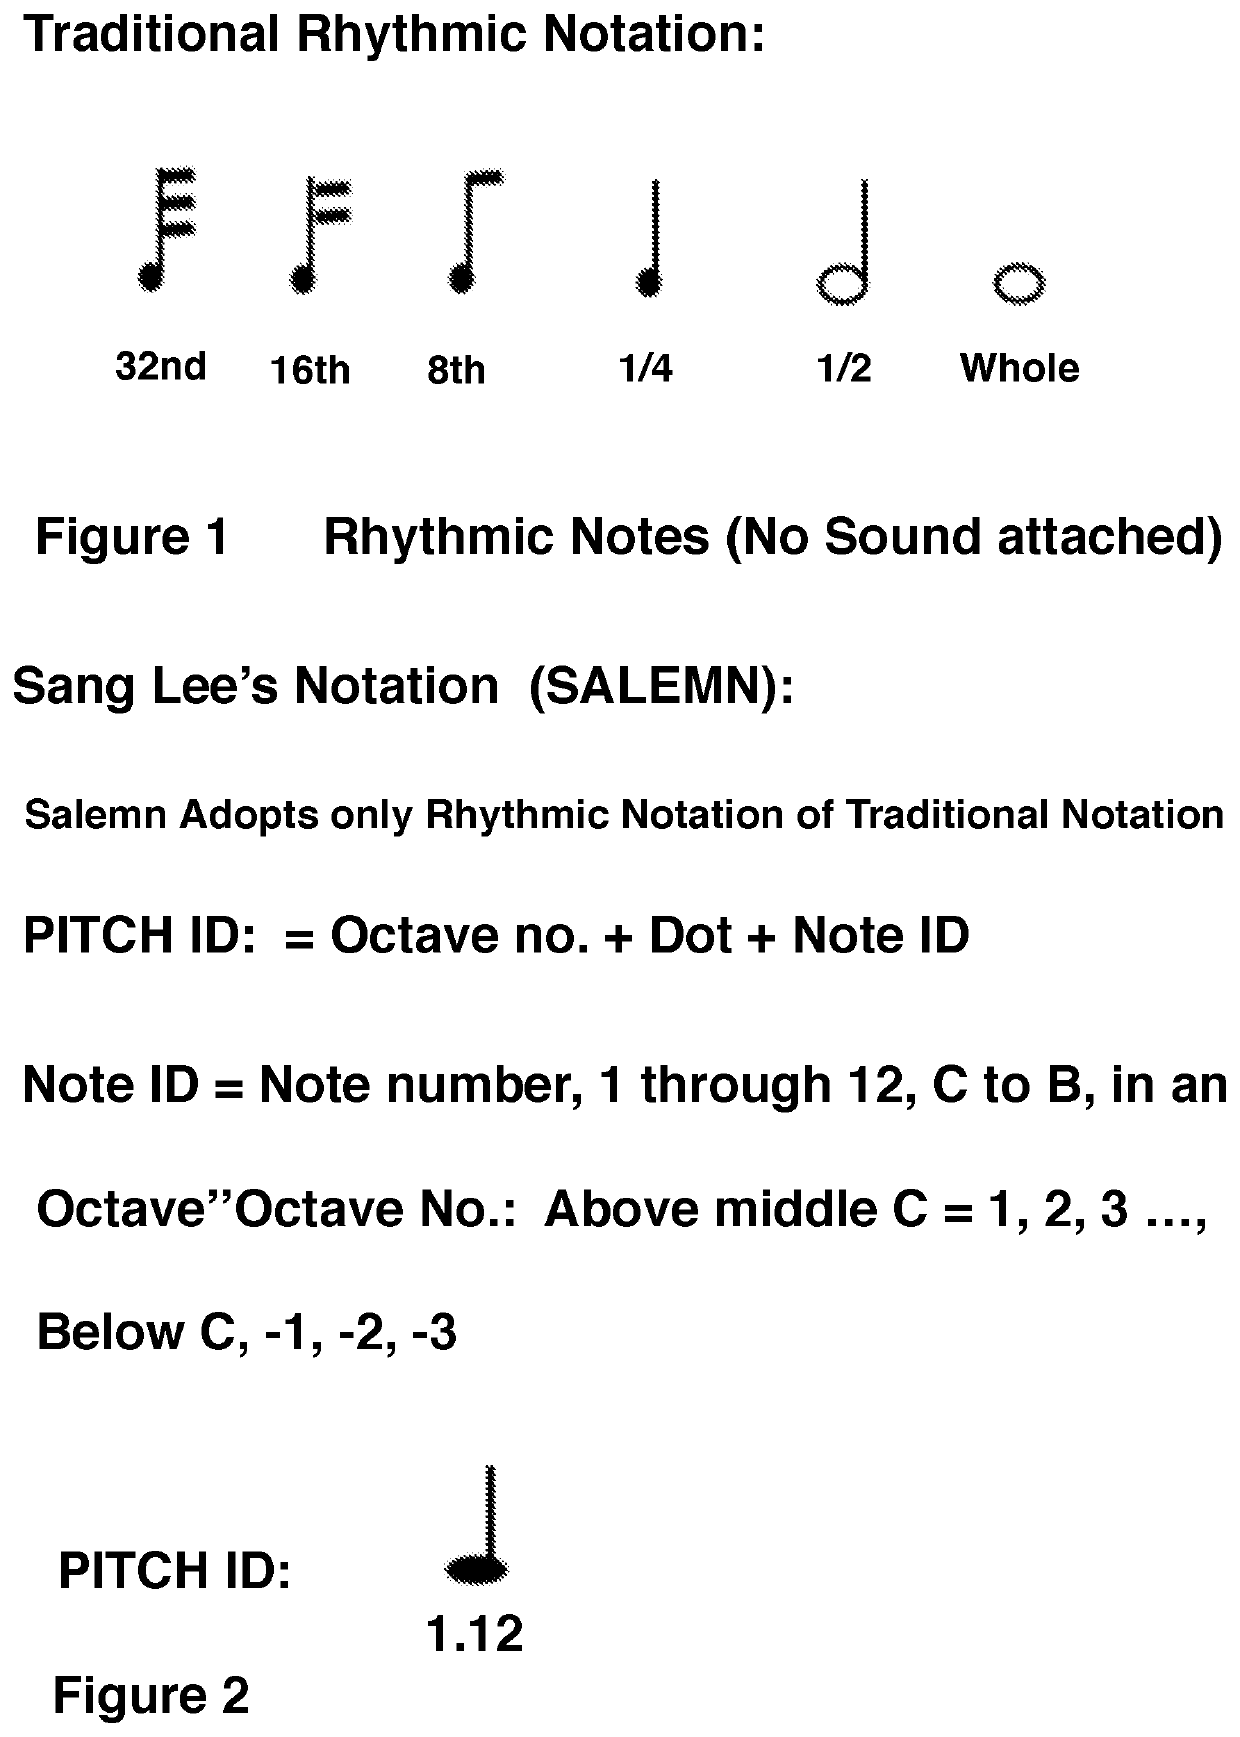 Sang Lee's Music Notation System, SALEMN, Maps Out Space-Time Topology of Sound, Enriches Palettes of Colors via Hand-Brush Techniques